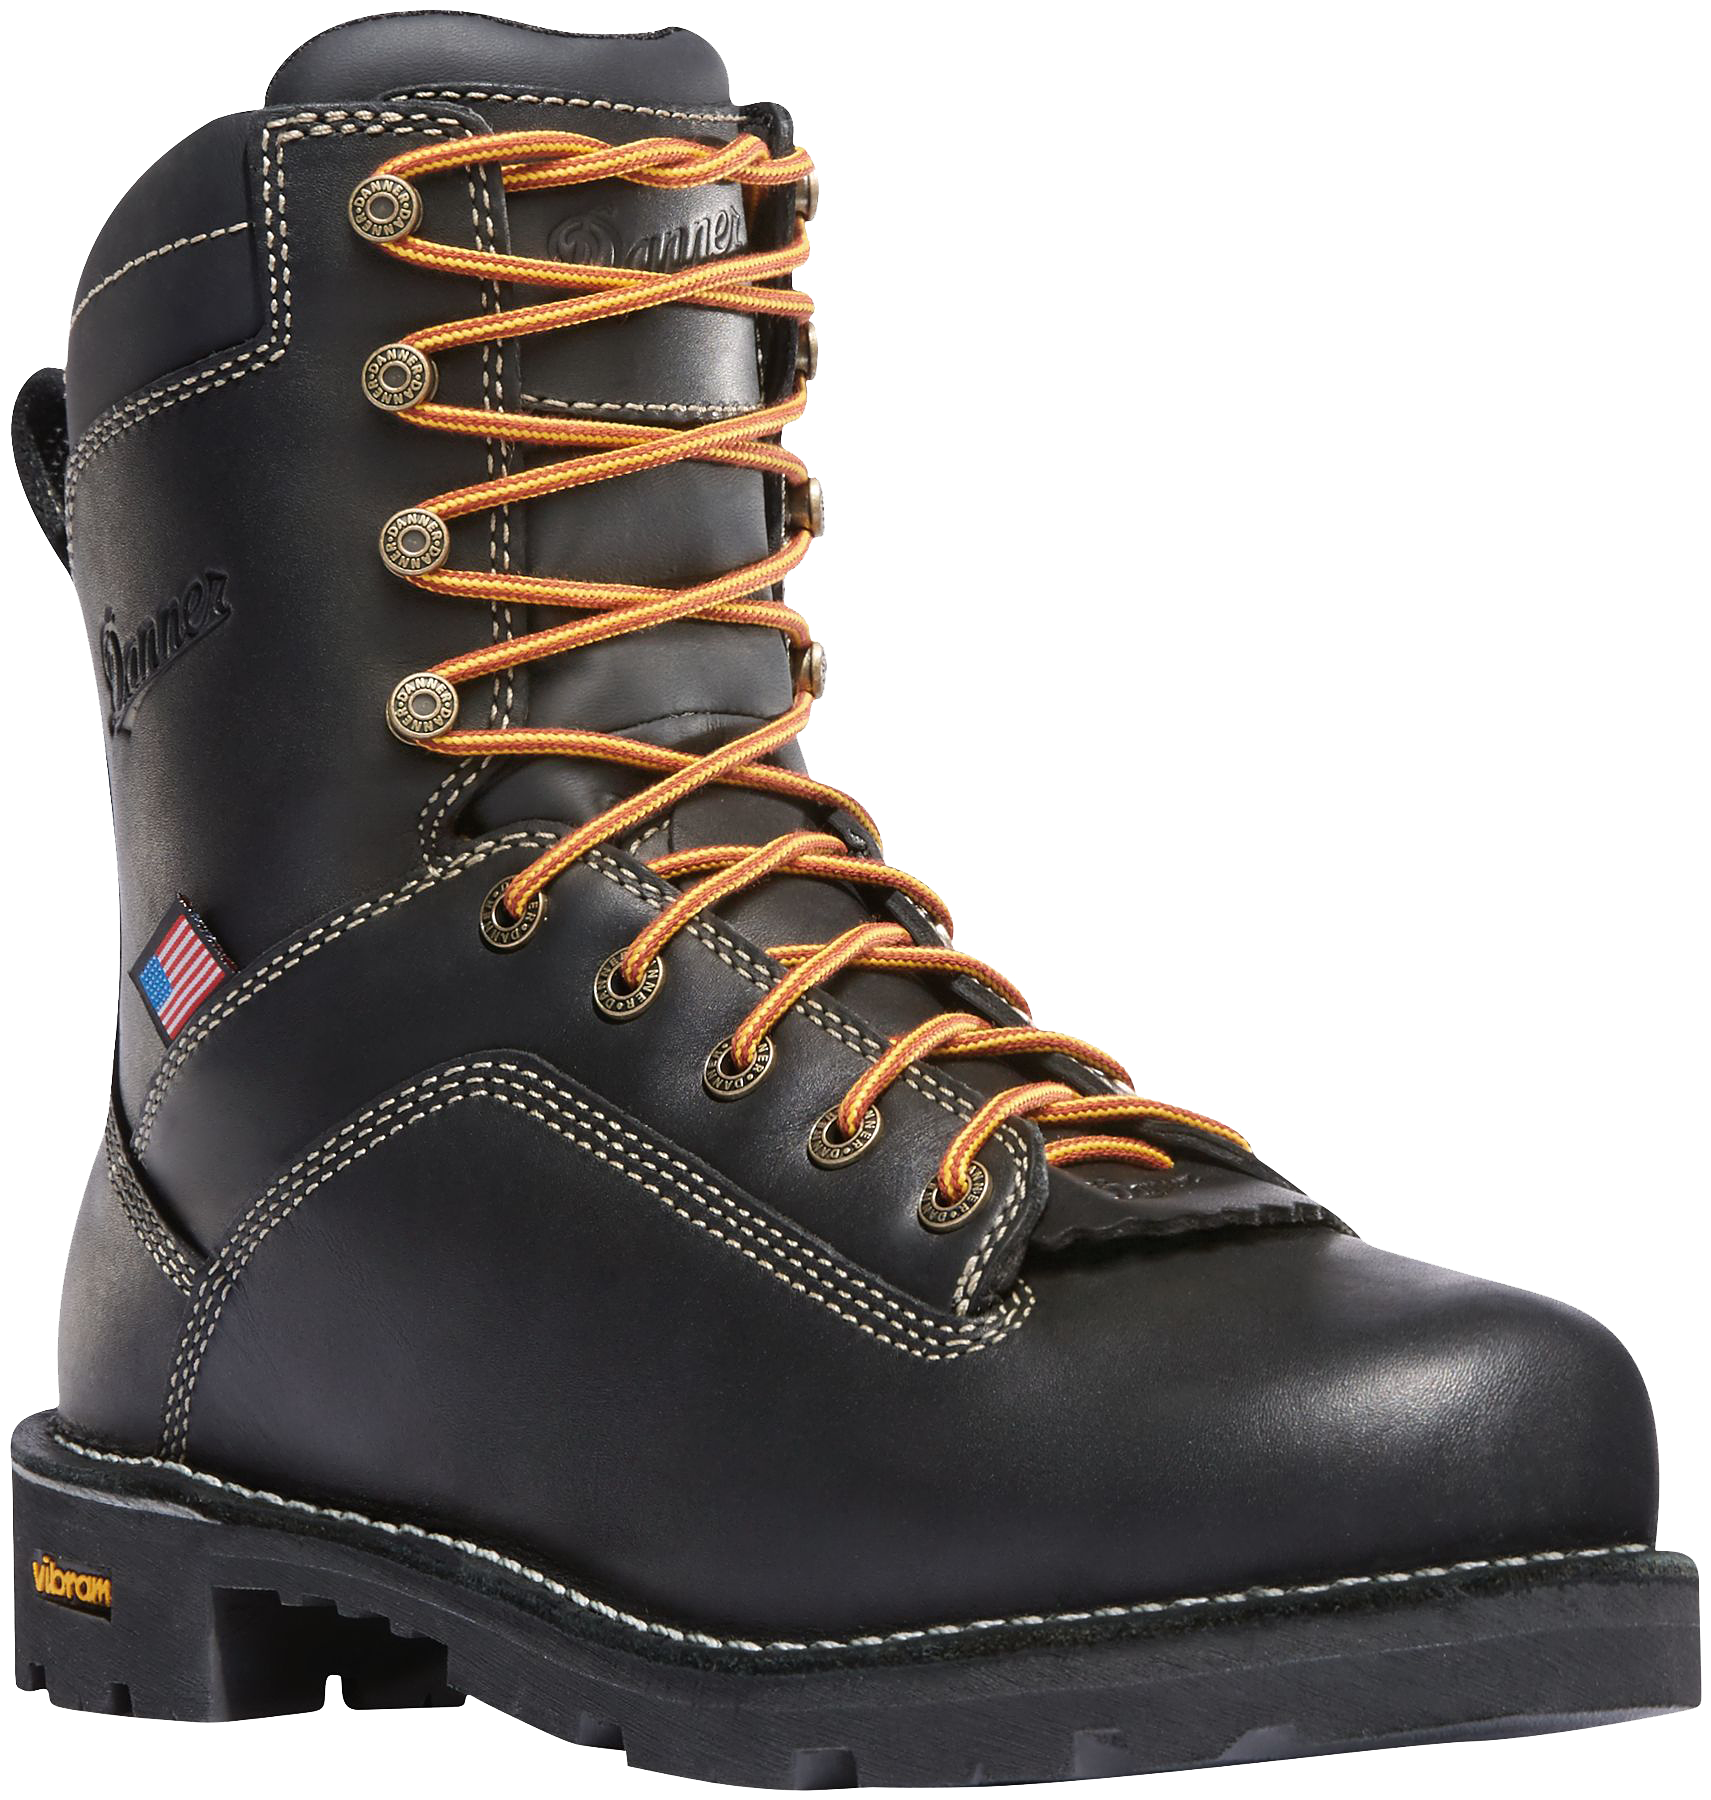 Danner Quarry USA Brown GORE-TEX Alloy Toe Work Boots for Men - Black - 7M